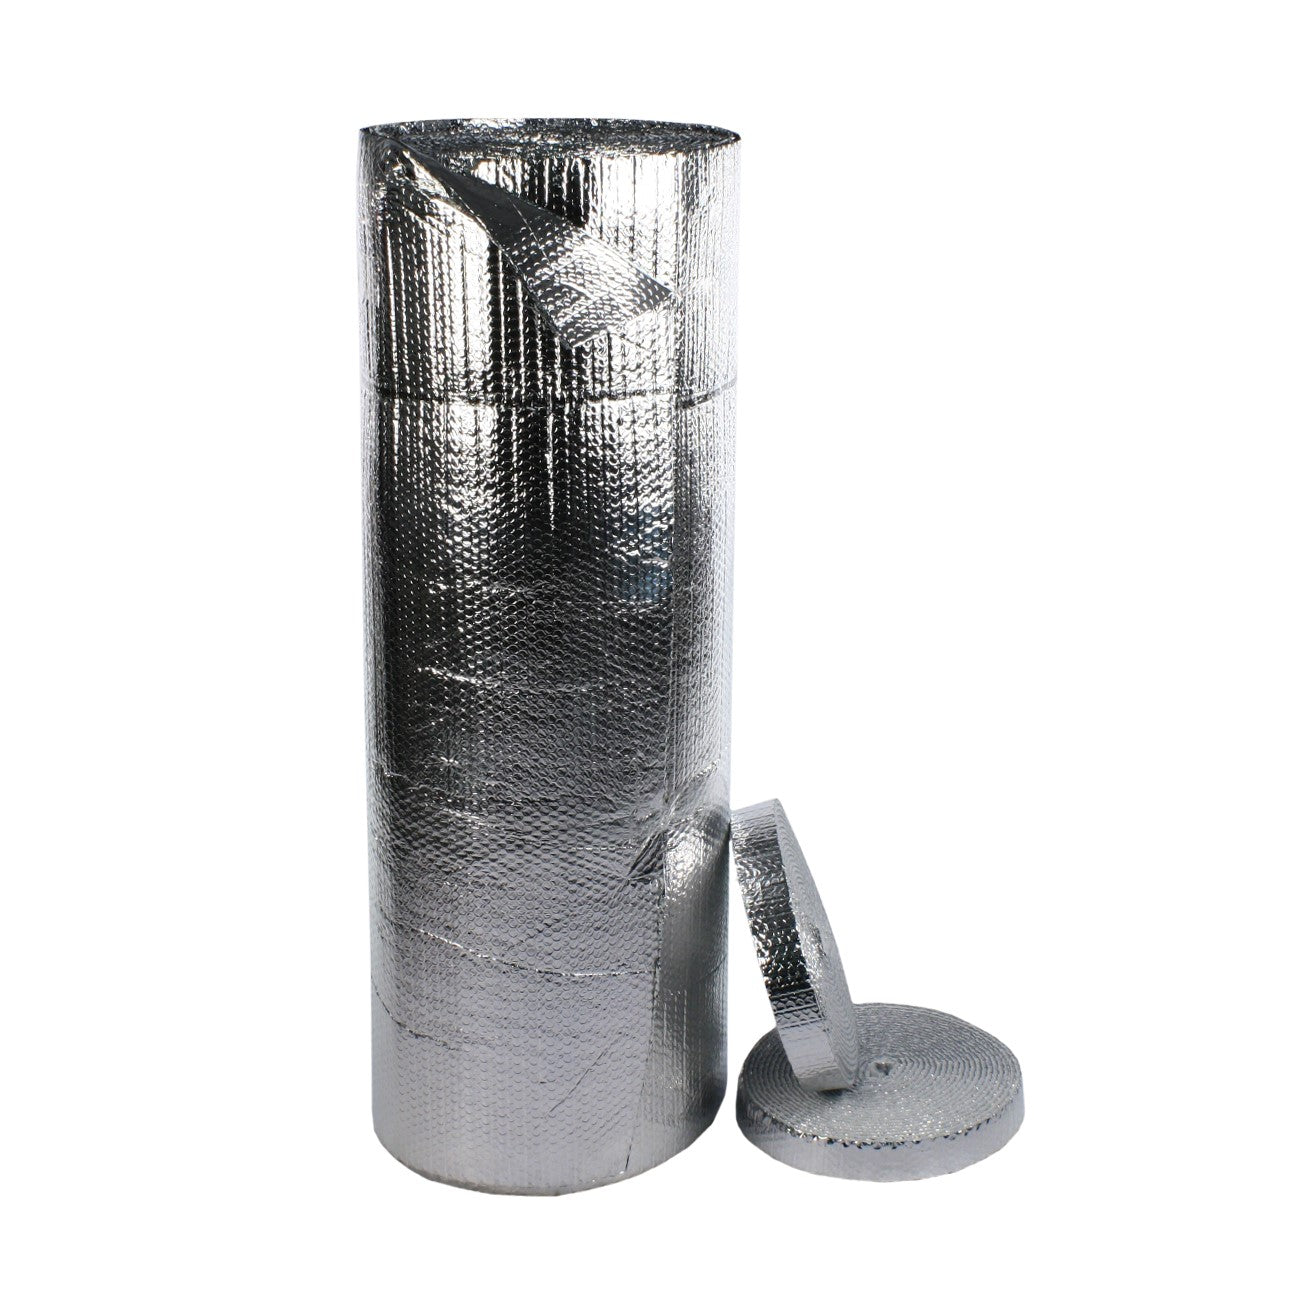 Foil Roll (12 inches x 200 feet) -no coupon codes